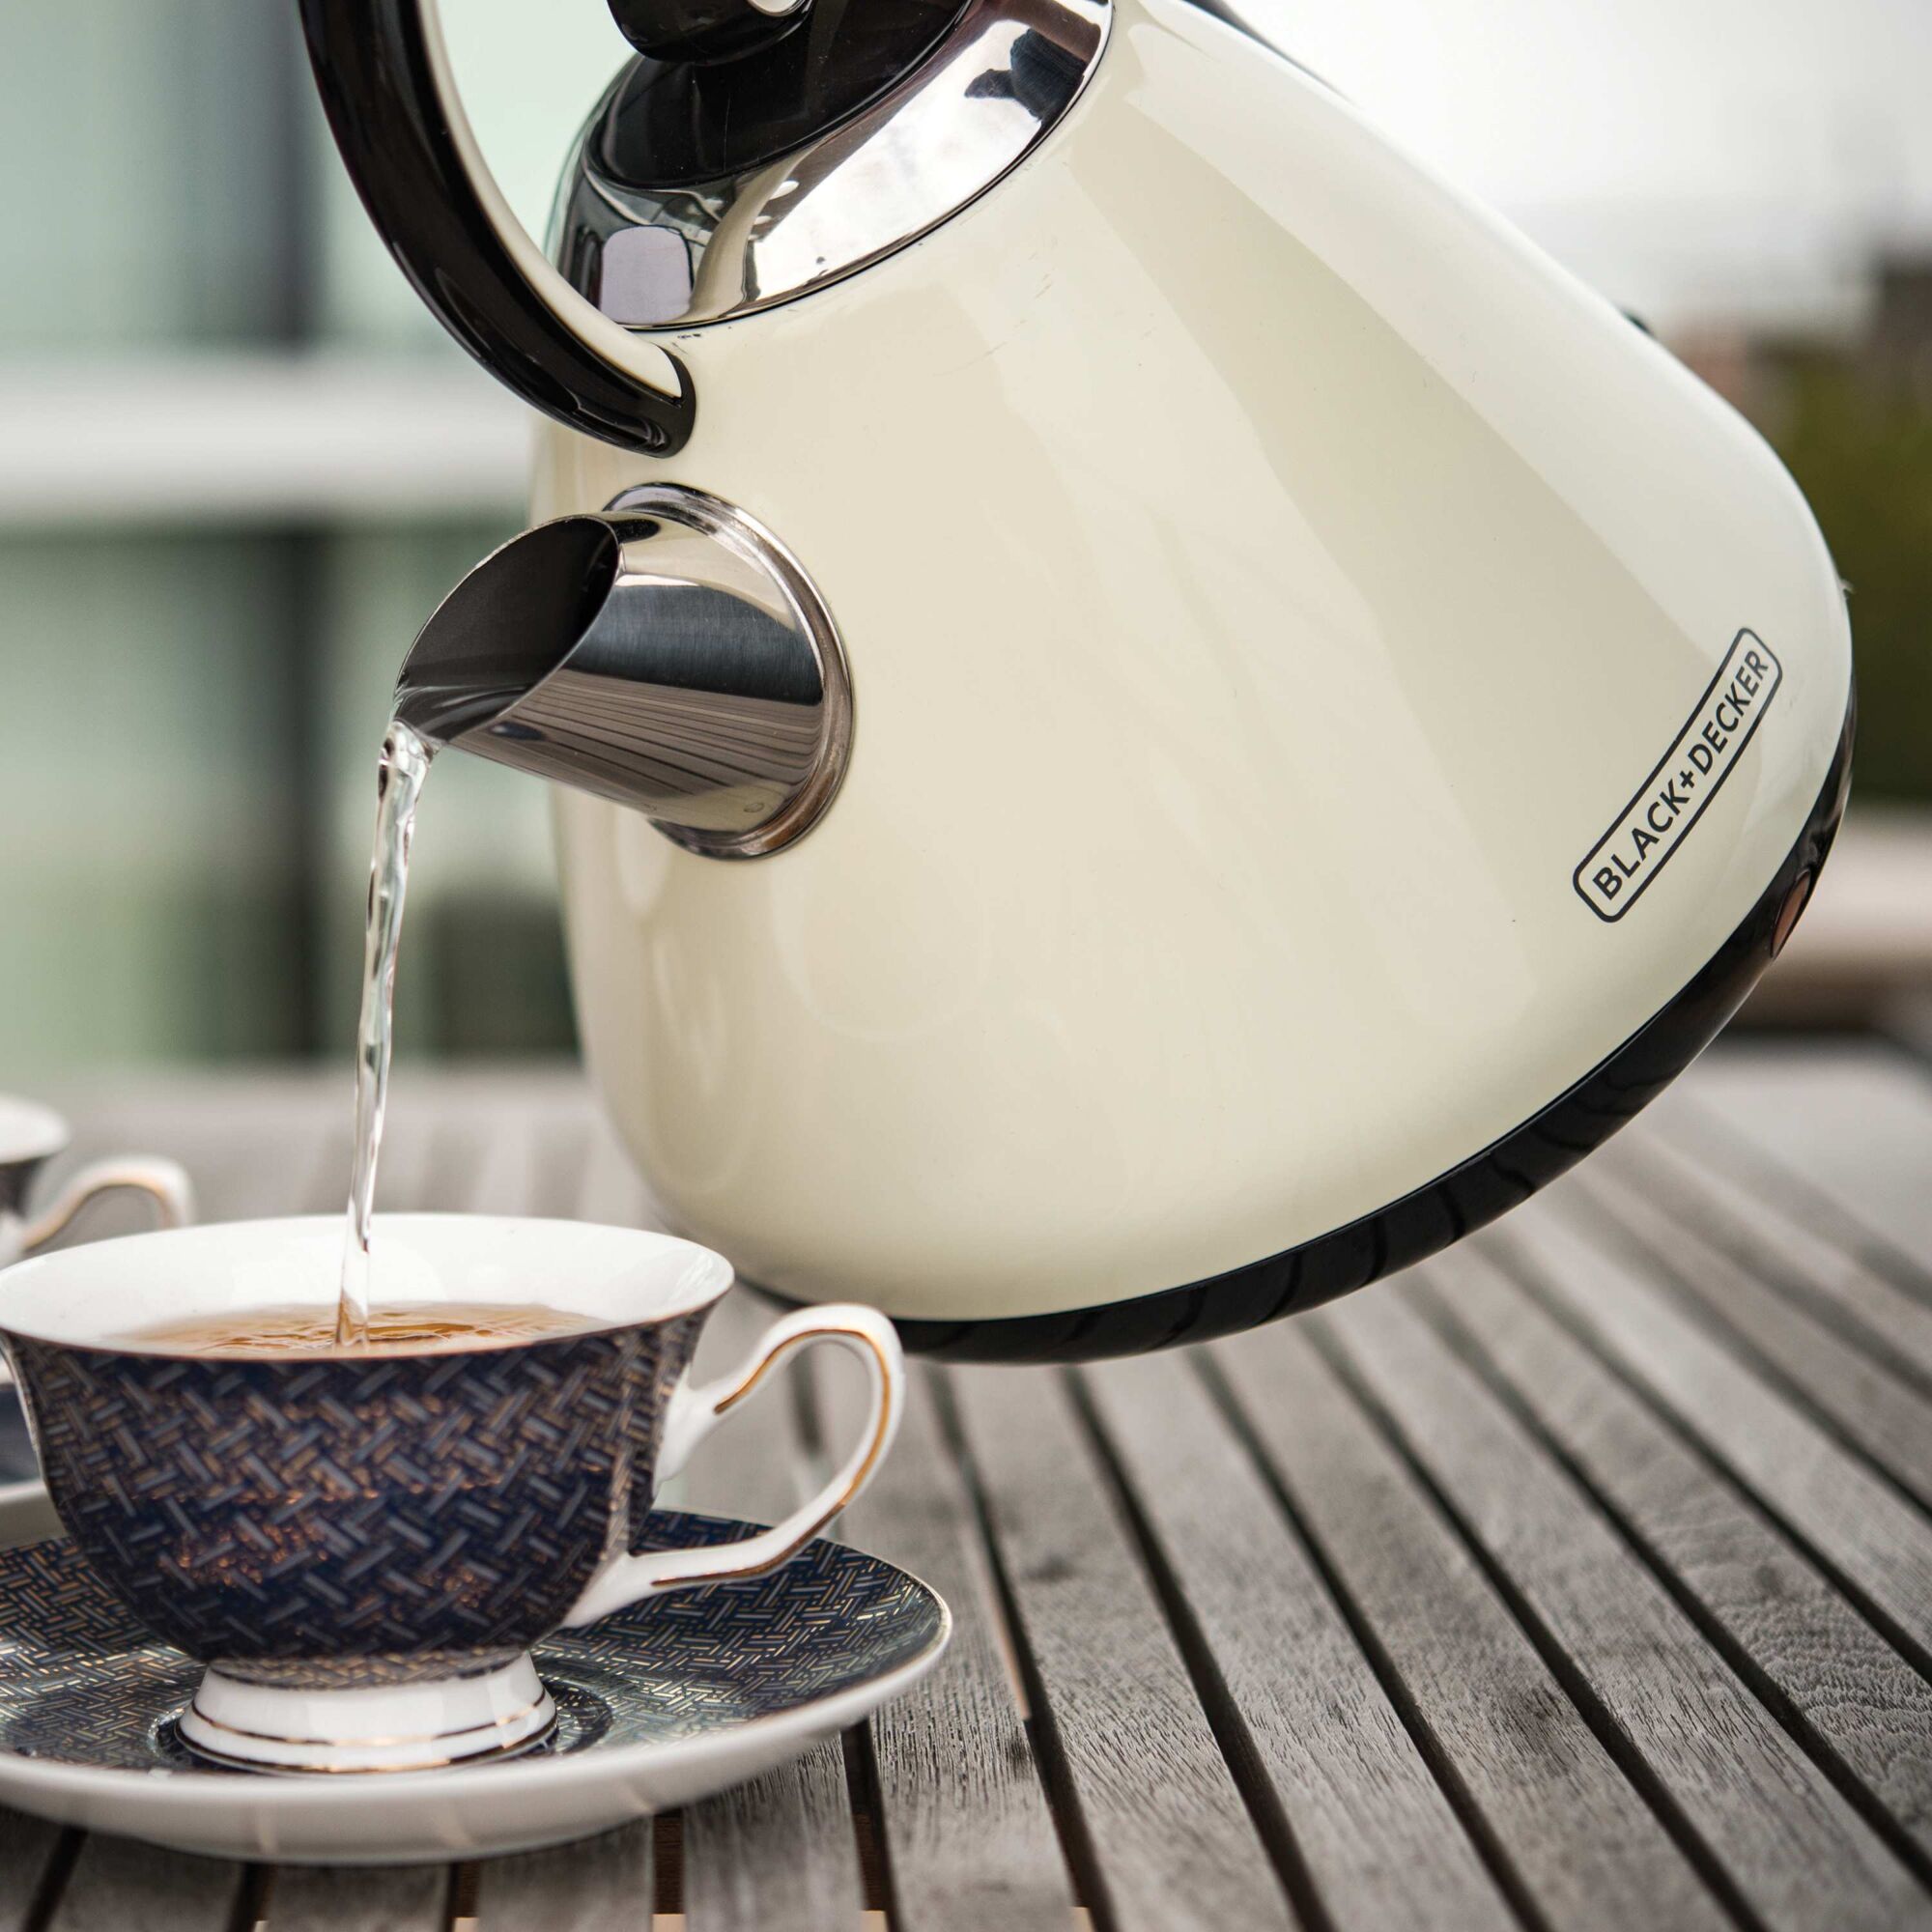 1.7 liter Stainless Steel Electric Cordless Kettle being used to pour hot water into cup.